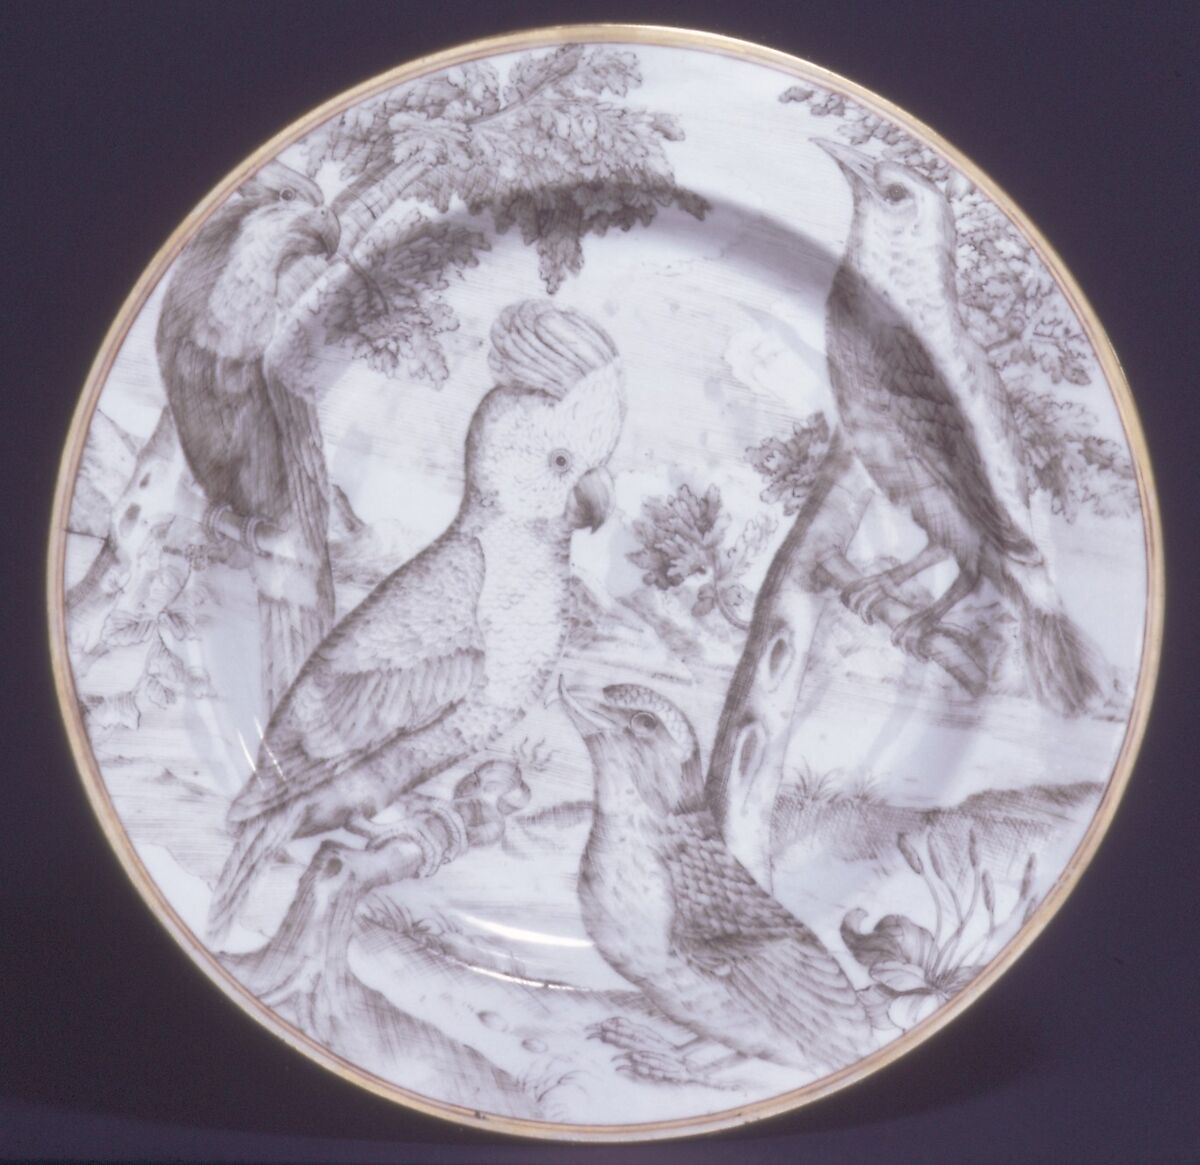 Plate (one of two), After a design by Pieter Boel (1622–1674), Hard-paste porcelain, Chinese, for British market 